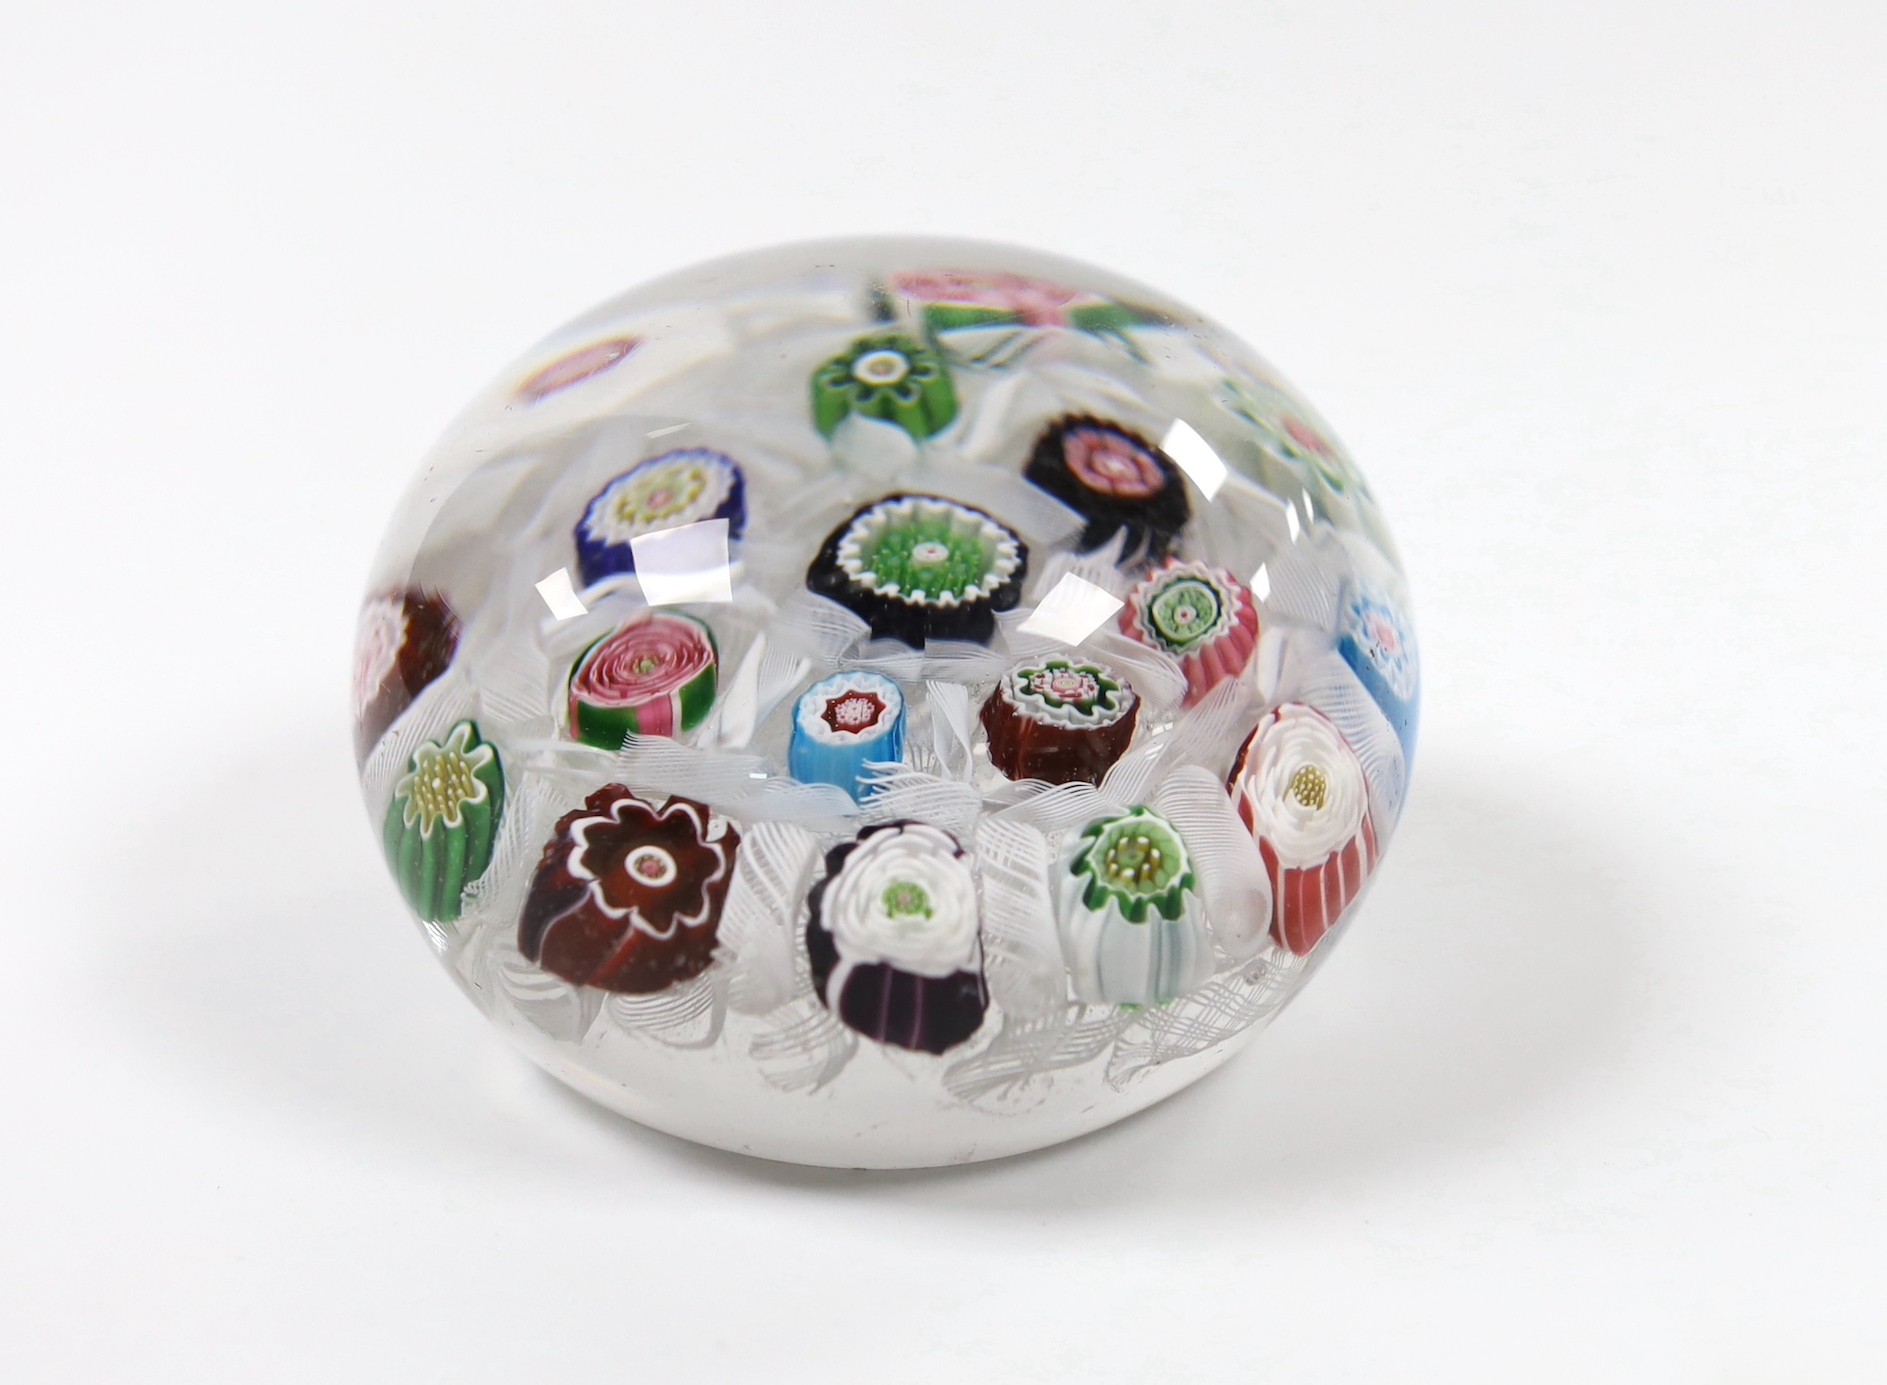 A Clichy glass paperweight with Clichy rose